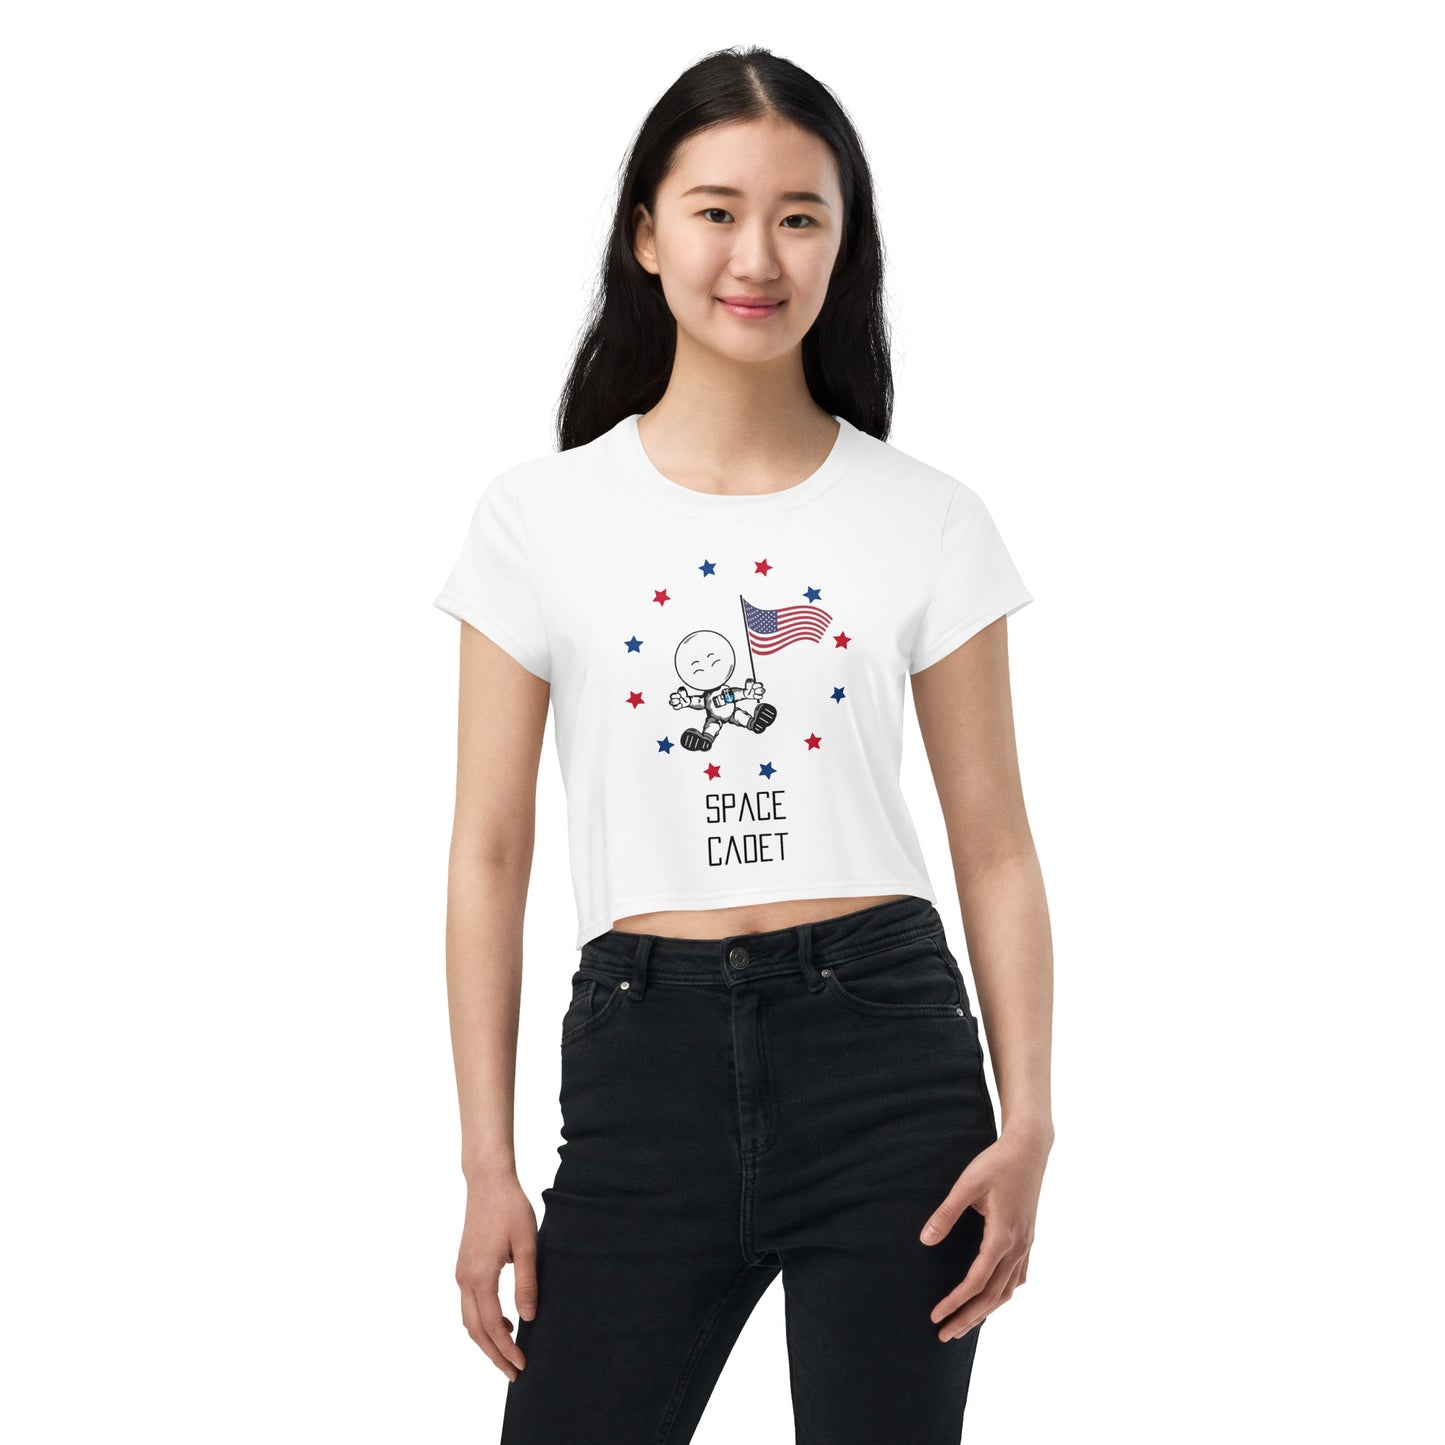 USA Space Cadet All-Over Print Crop Tee